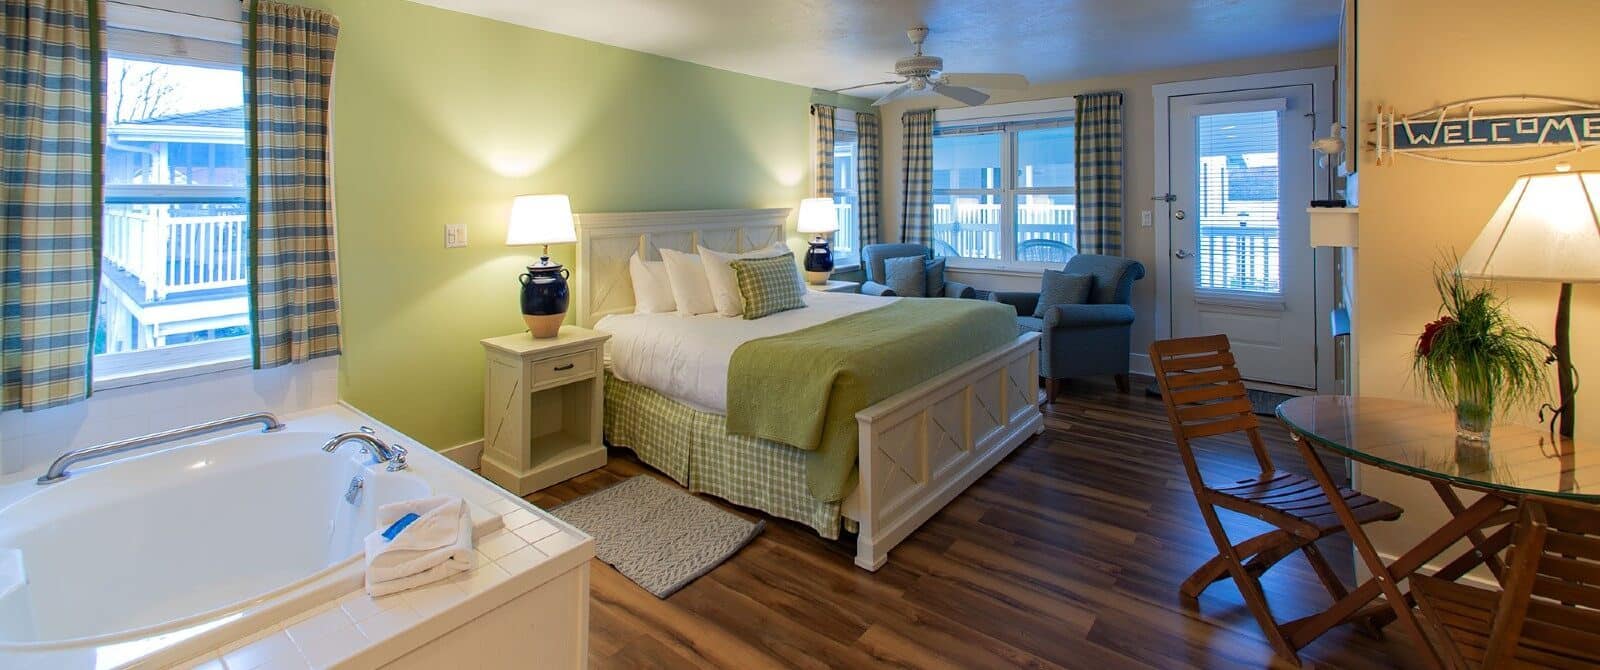 Bedroom with hardwood floors. queen bed, jacuzzi tub, sitting chairs, large windows with plaid curtains